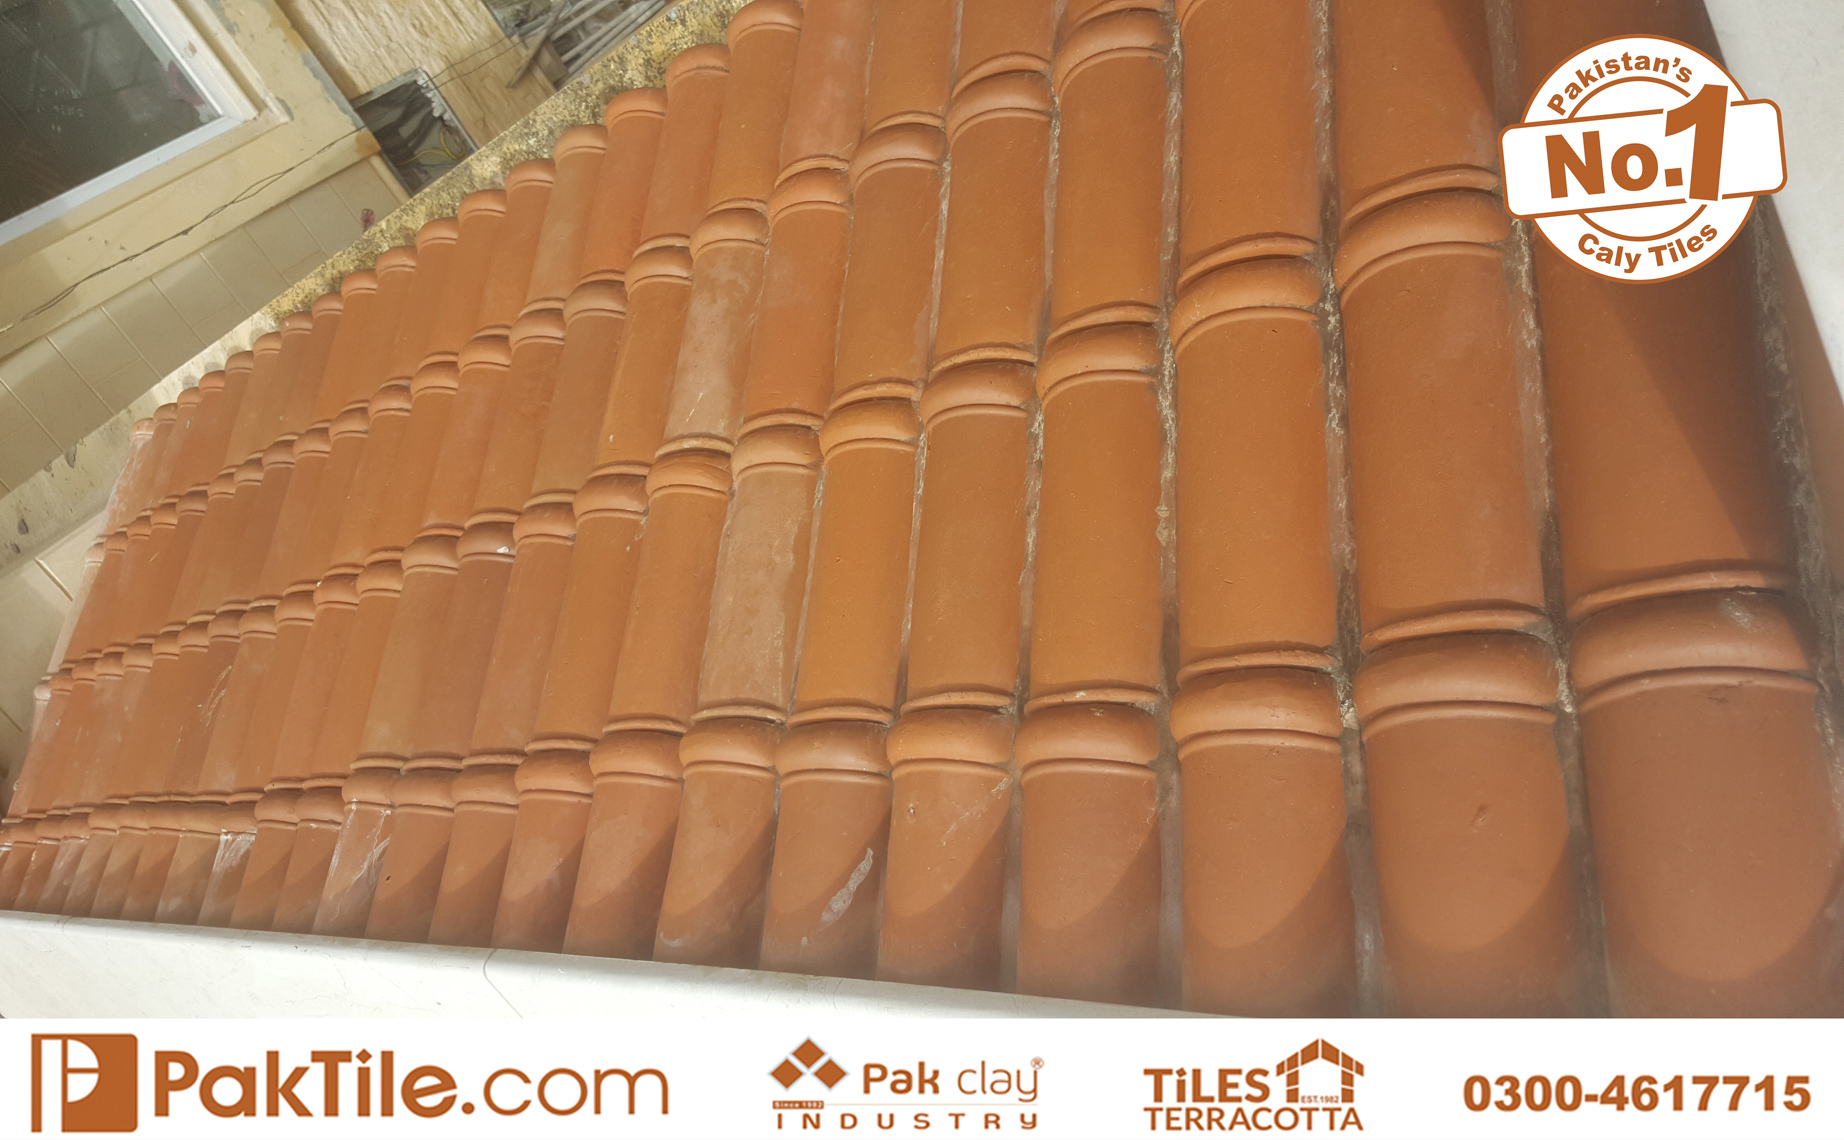 1 Terracotta Pak Caly Tiles Concrete Roof Khaprail Tiles Roof Tiles Types and Prices in Pakistan Images